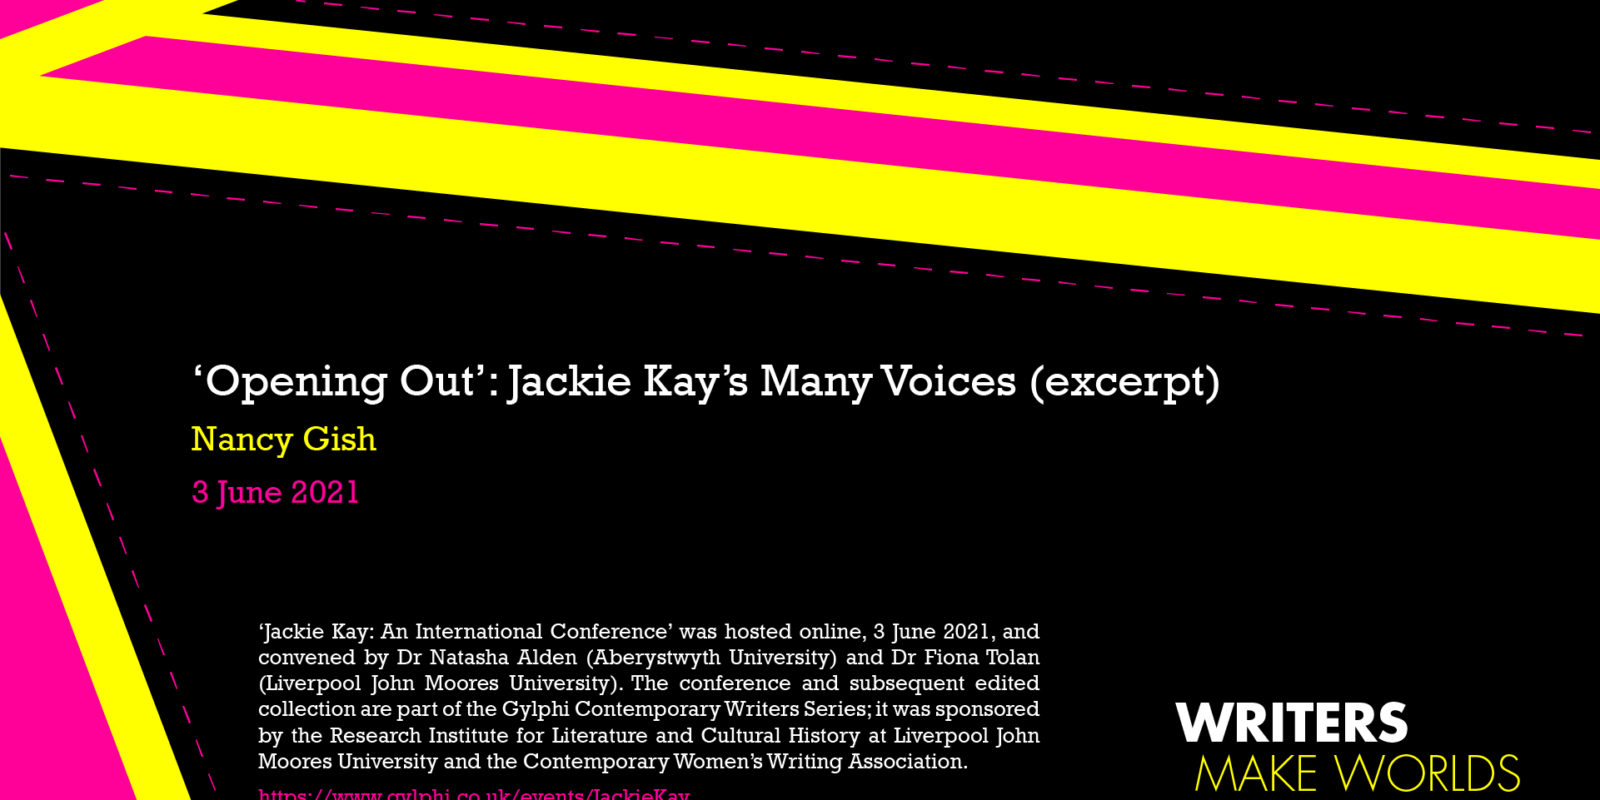 Nancy Gish - '"Opening Out": Jackie Kay’s Many Voices'